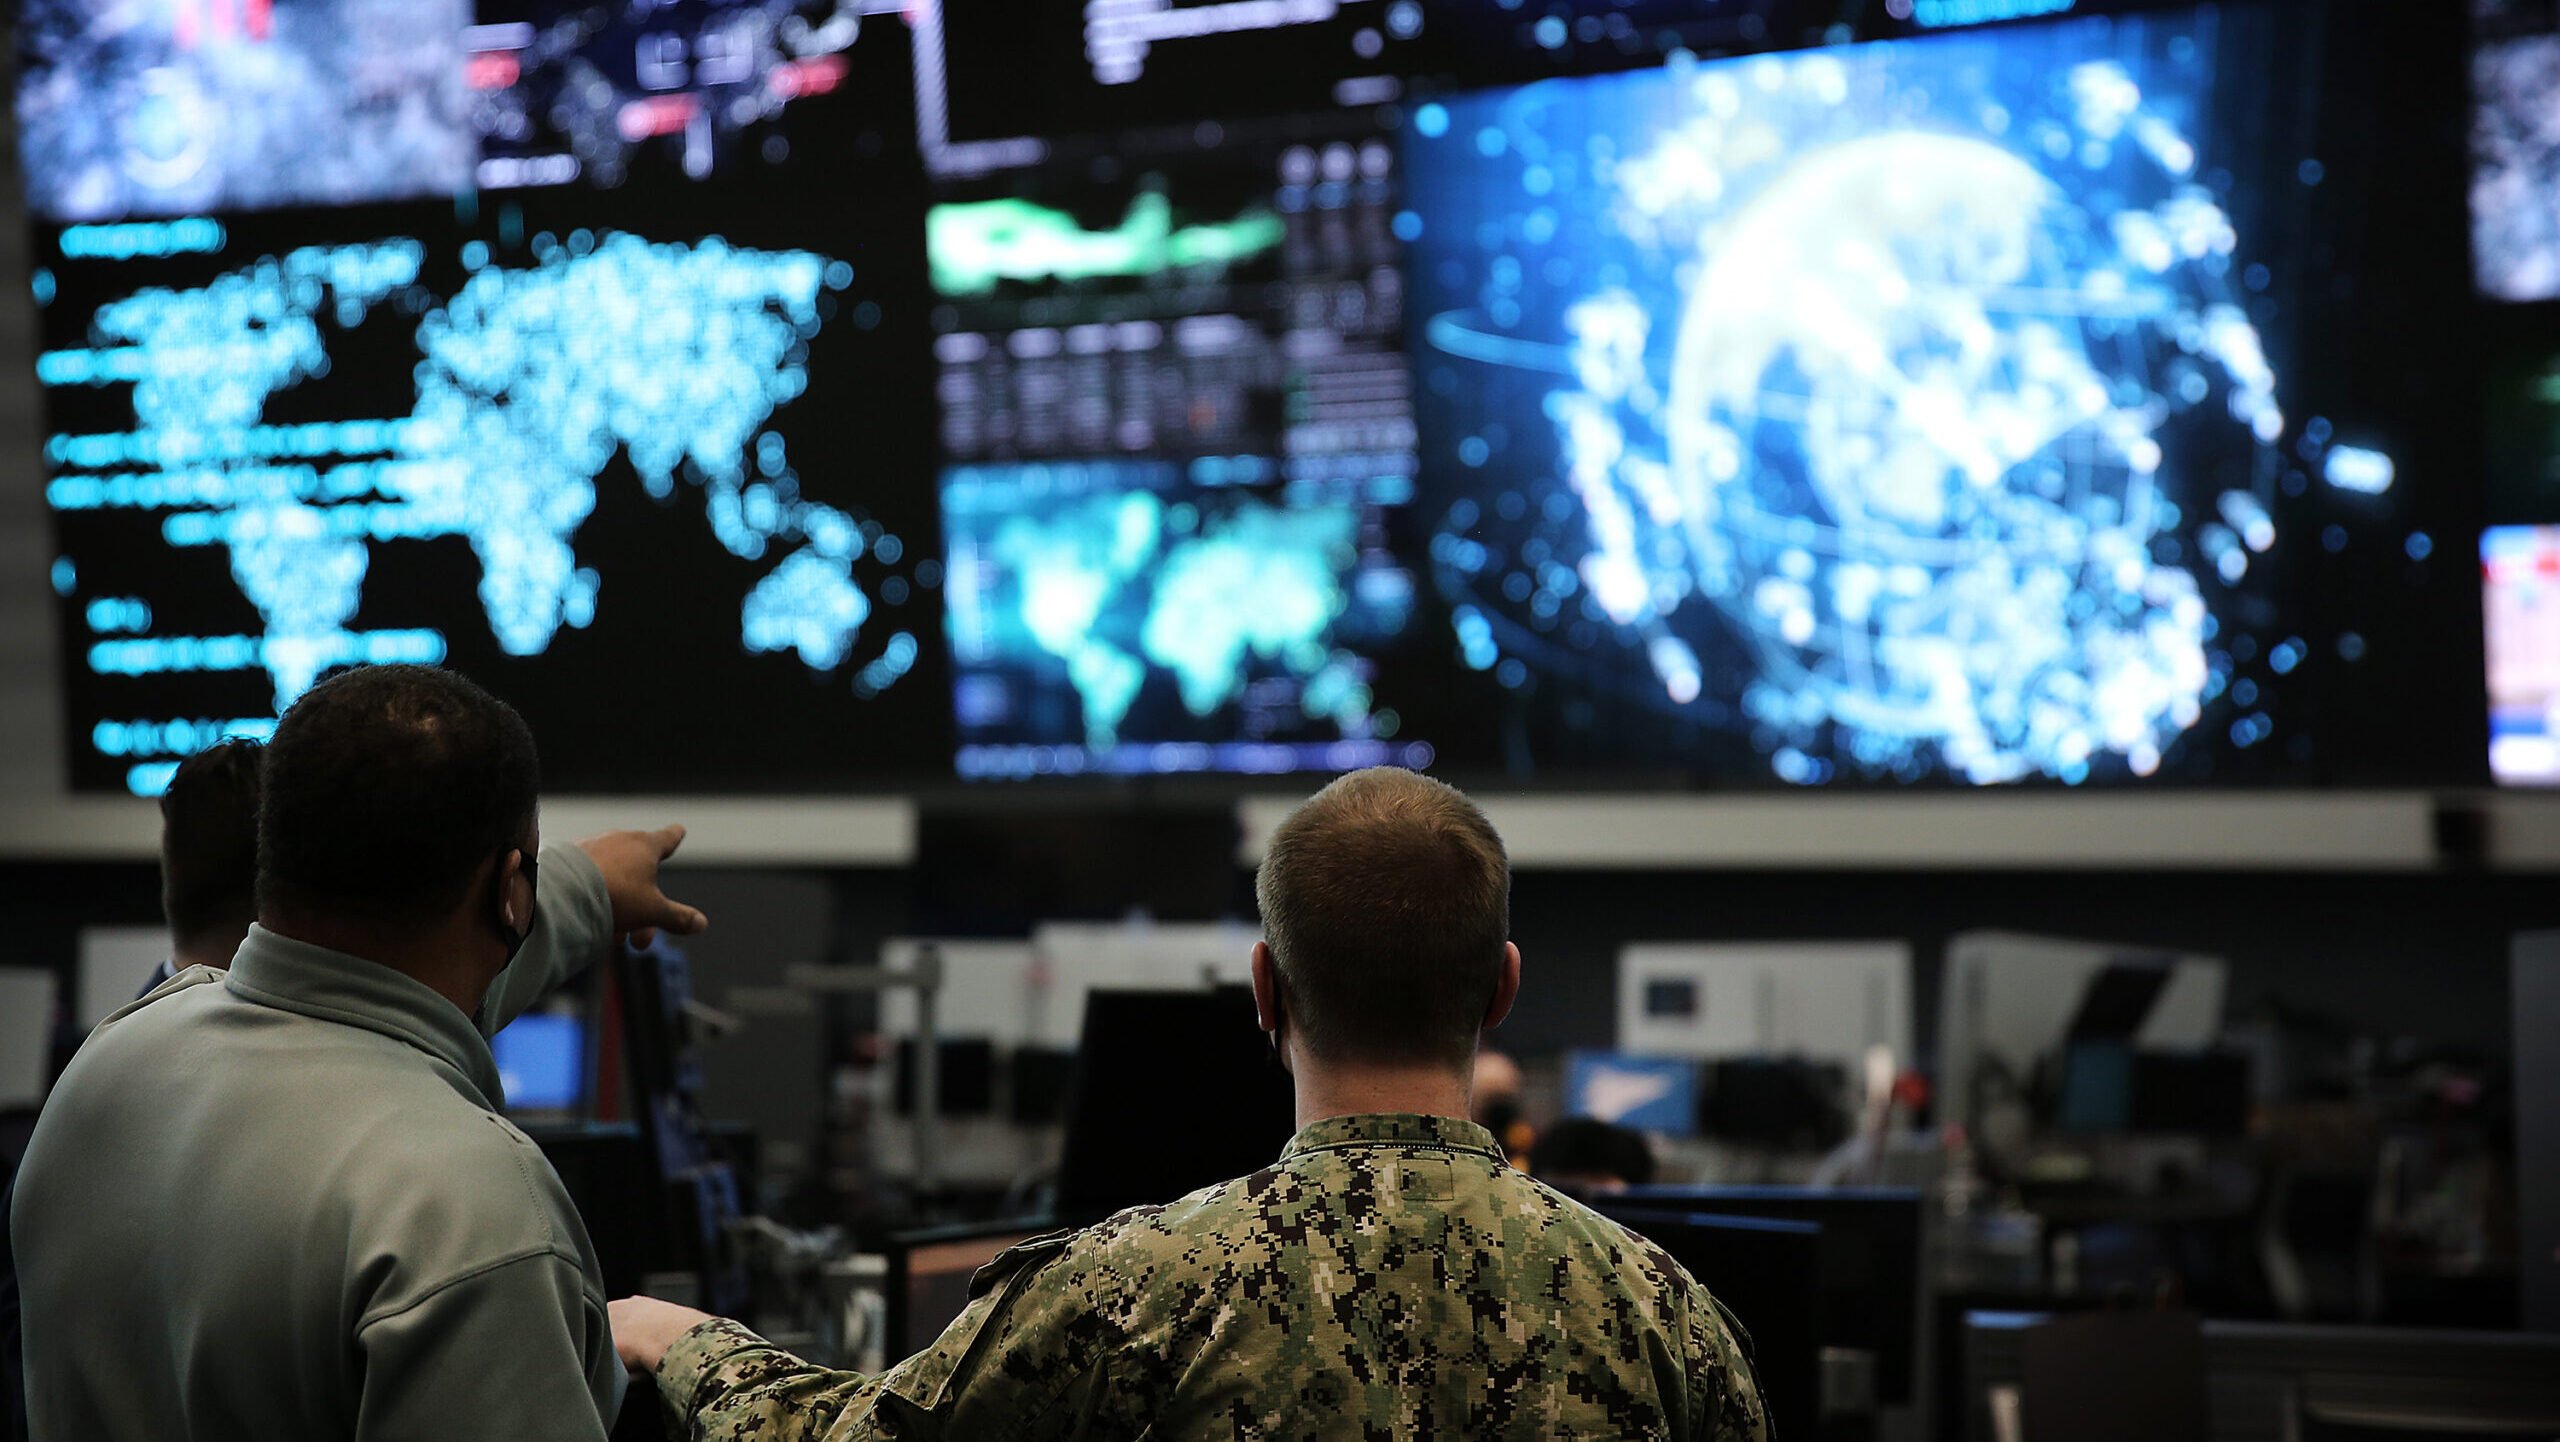 U.S. Cyber Command, Integrated Intelligence Center, Joint Operations Center